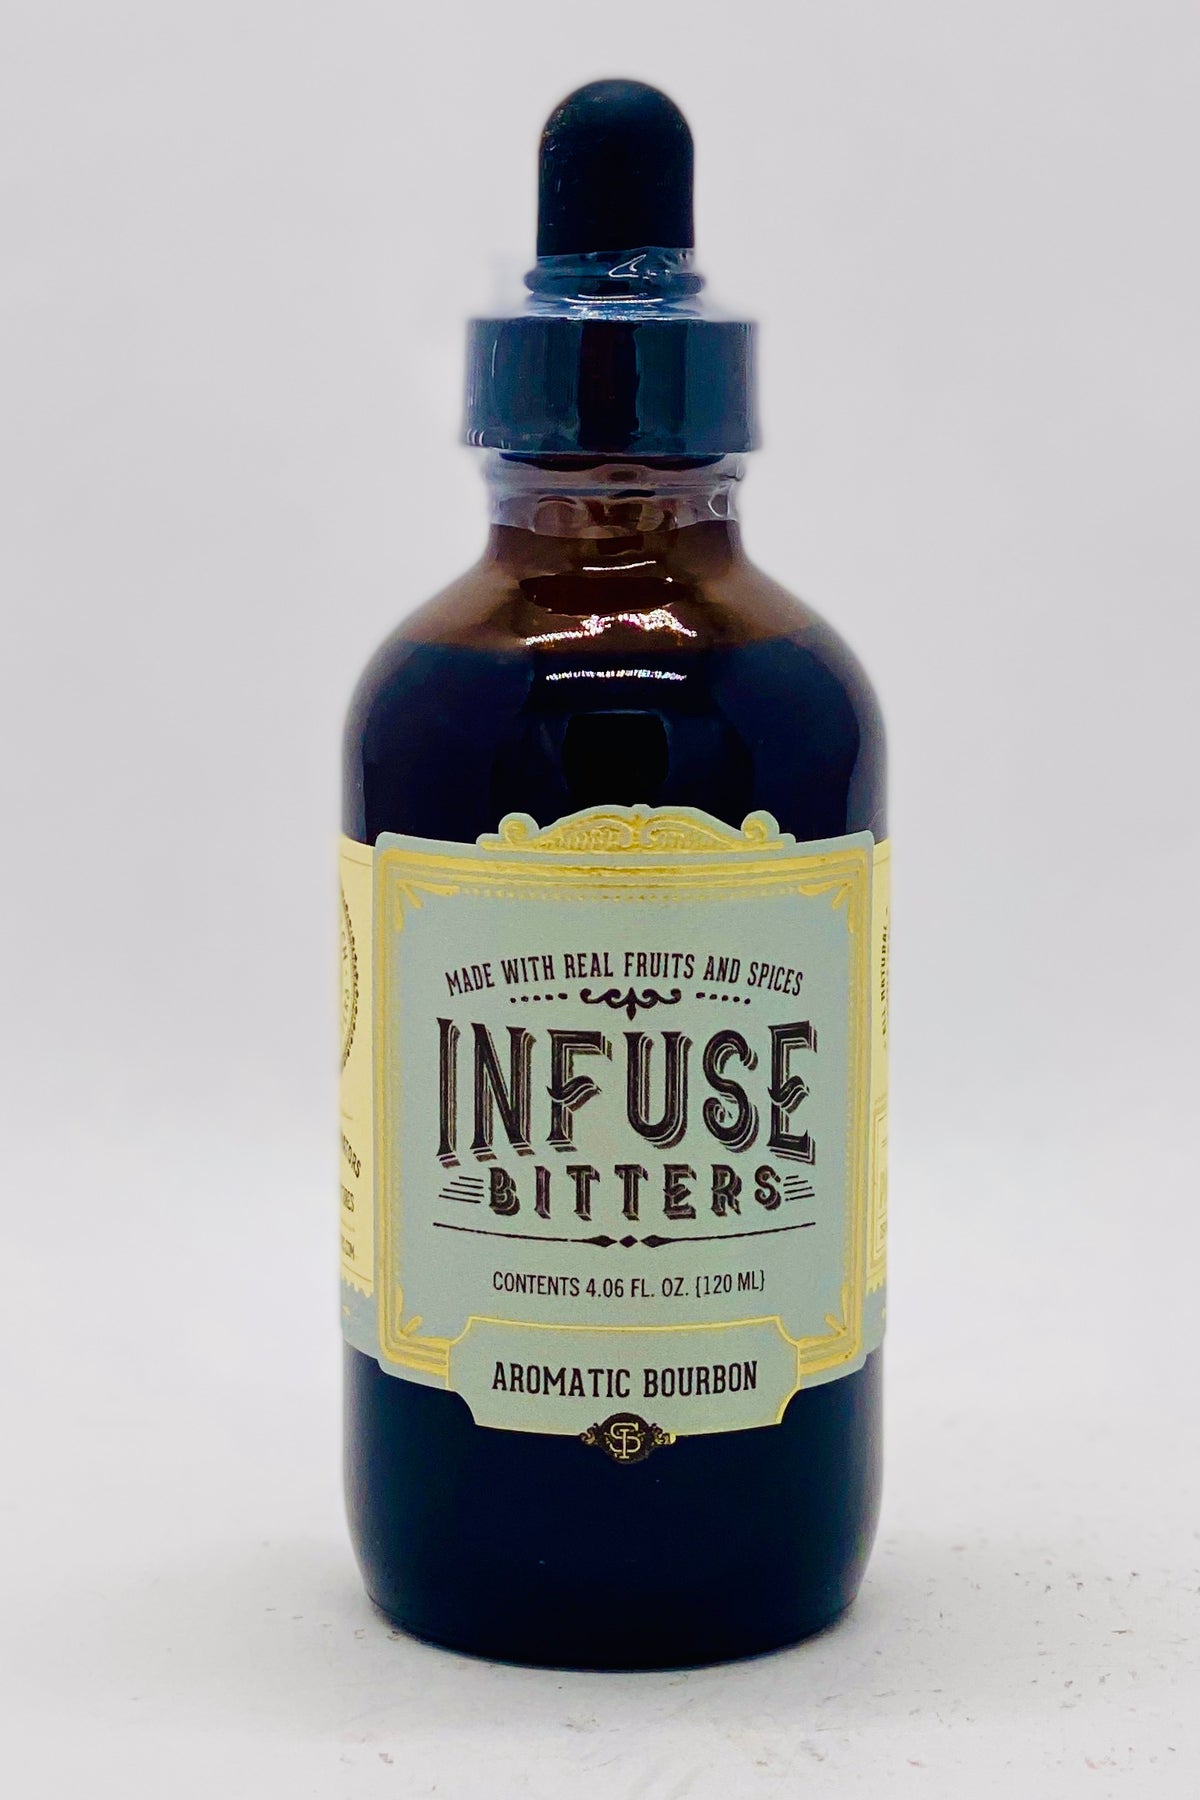 Infuse Bitters Aromatic Bourbon 120 ml